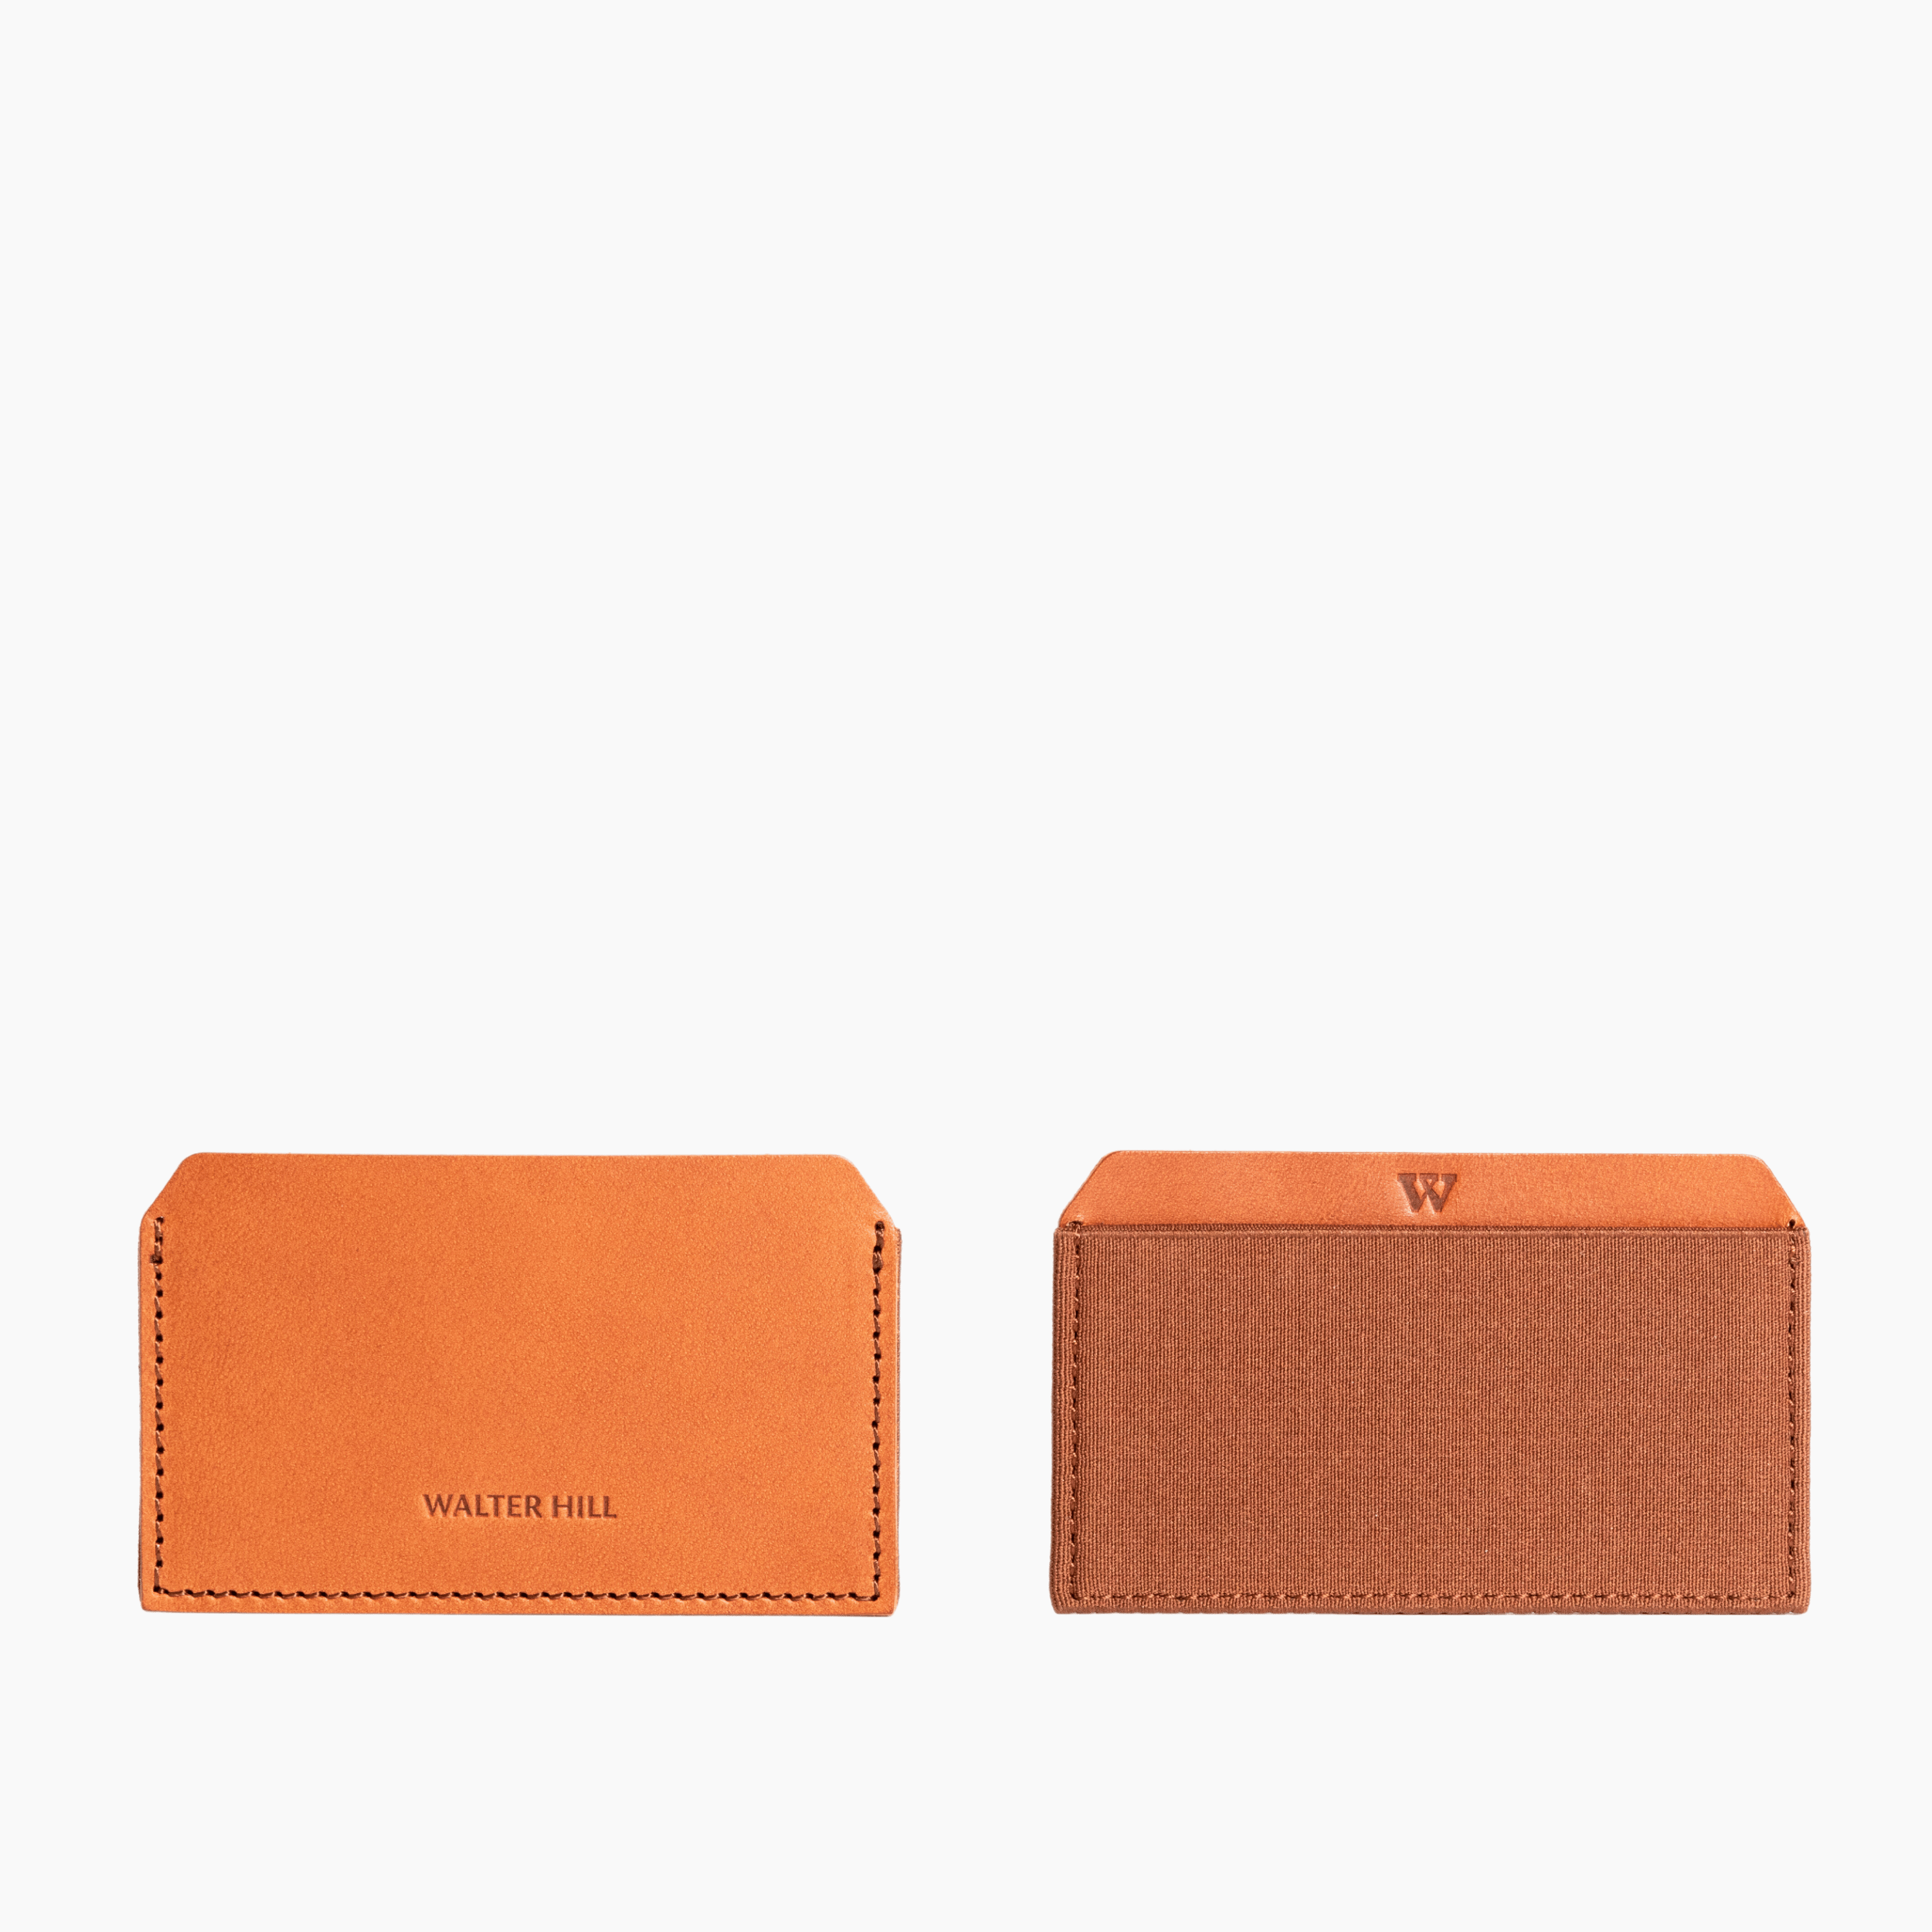 Walter Hill Wallets & Money Clips Tan / 2-8+ Cards / Italian Vegetable Tanned Leather CARD HOLDER WALLET - TAN